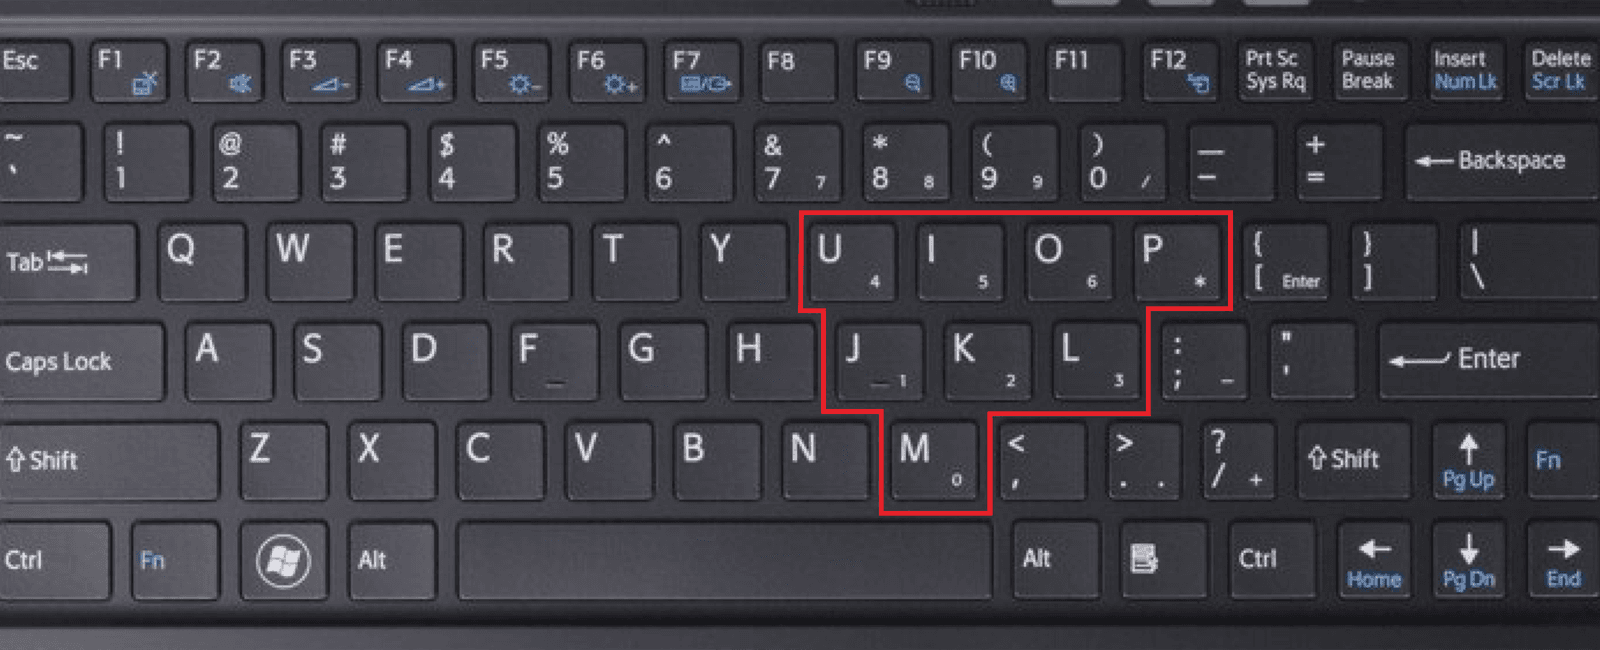 On a computer keyboard what letter is between q and e w